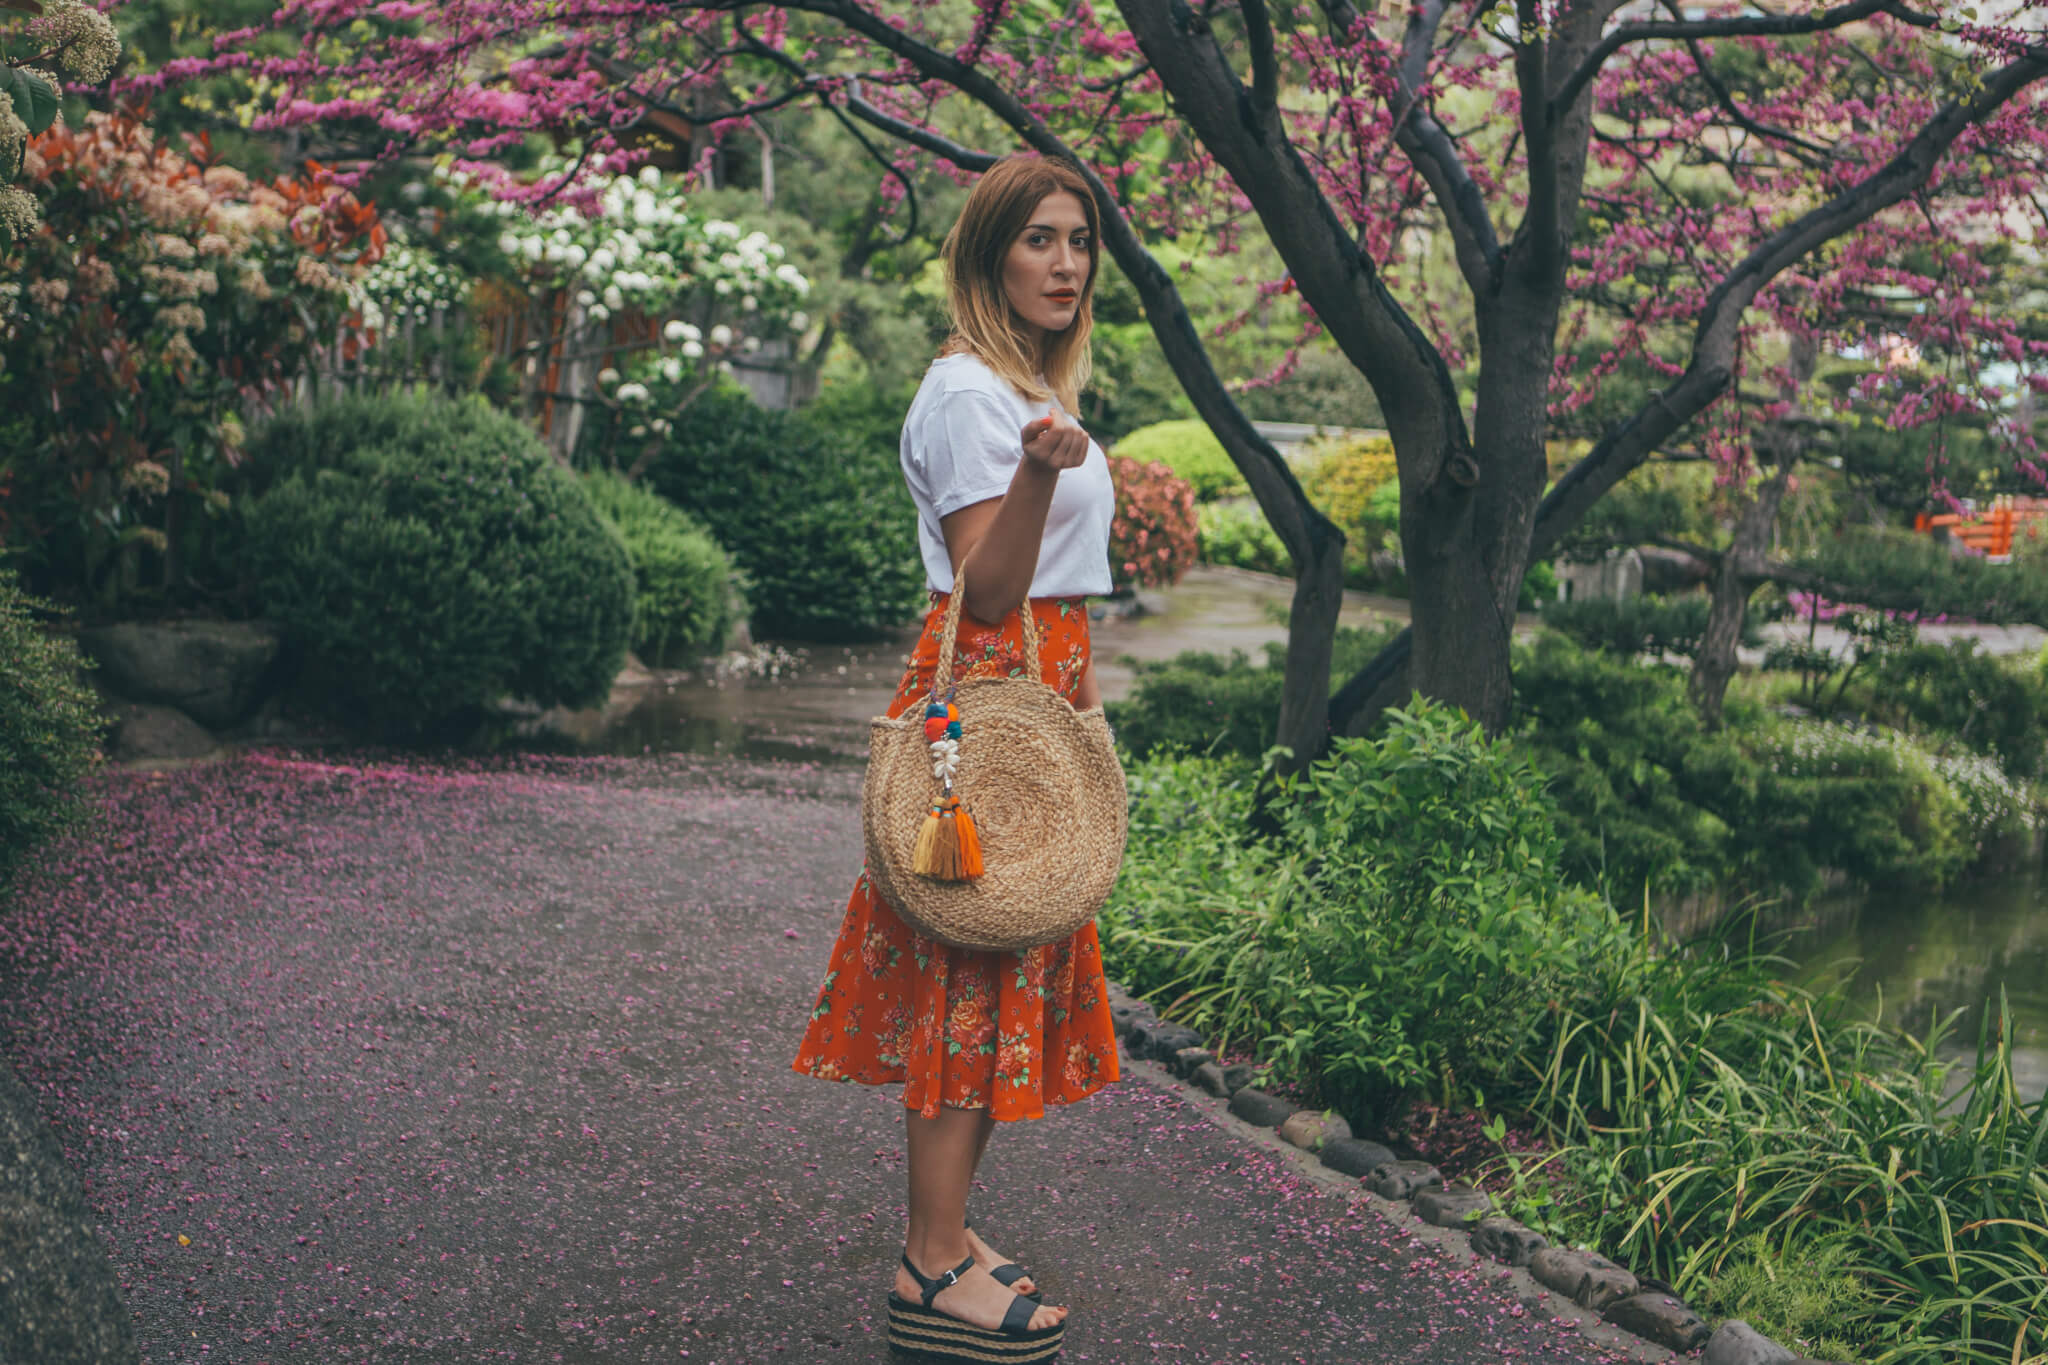 And-Other-Stories-Japanese-Garden-8-of-12-1 Japanese Garden Monaco - What I Wore